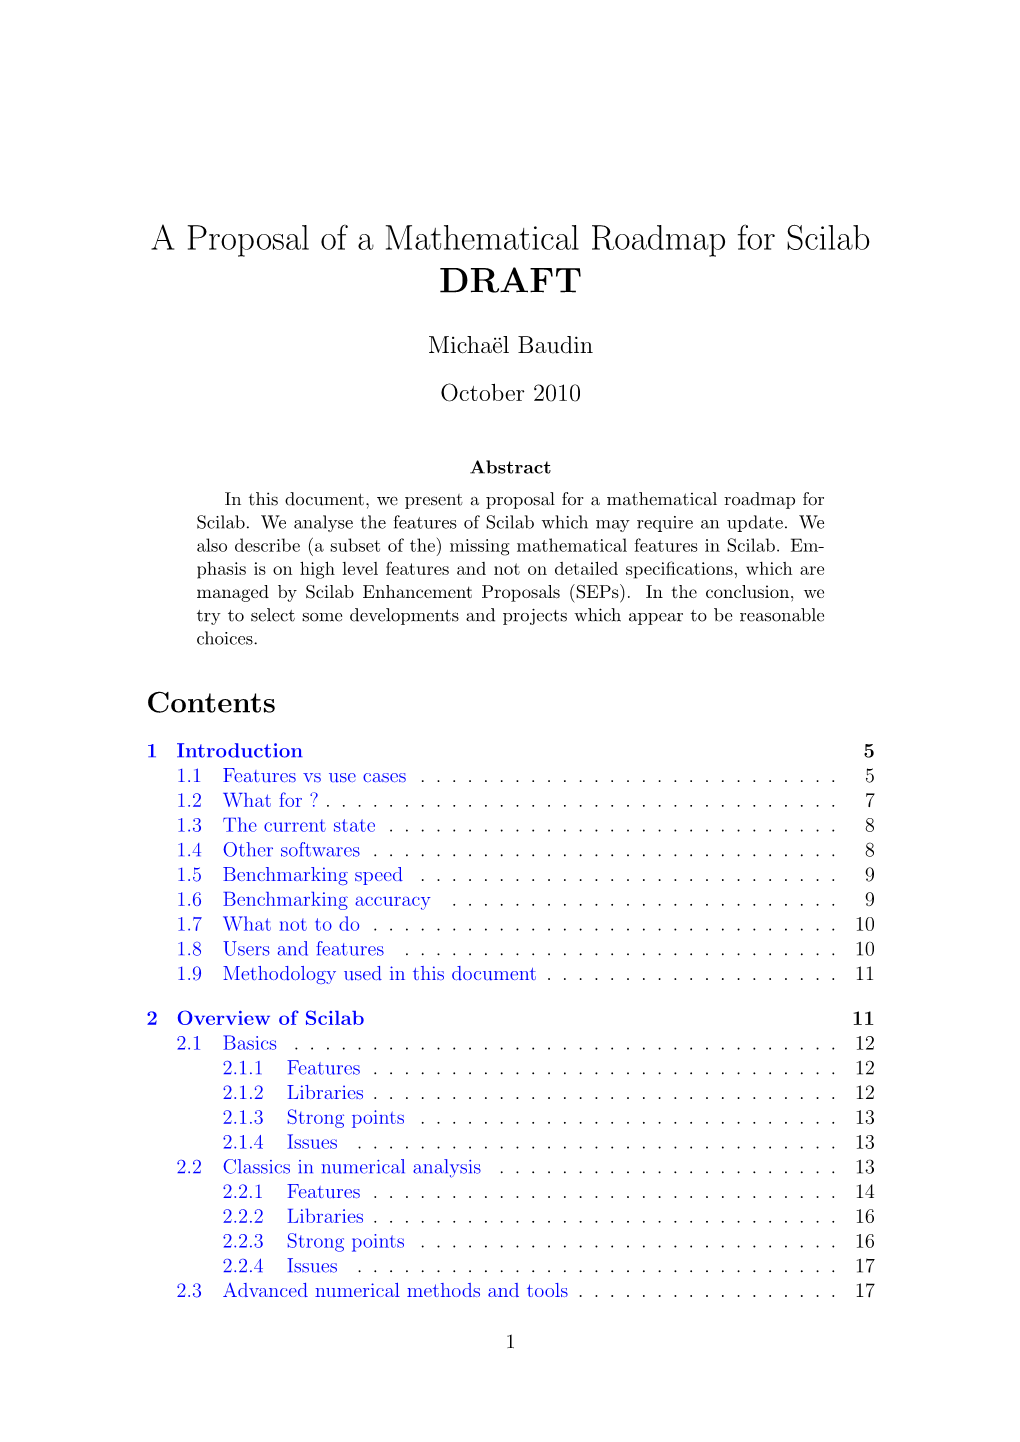 A Proposal of a Mathematical Roadmap for Scilab DRAFT